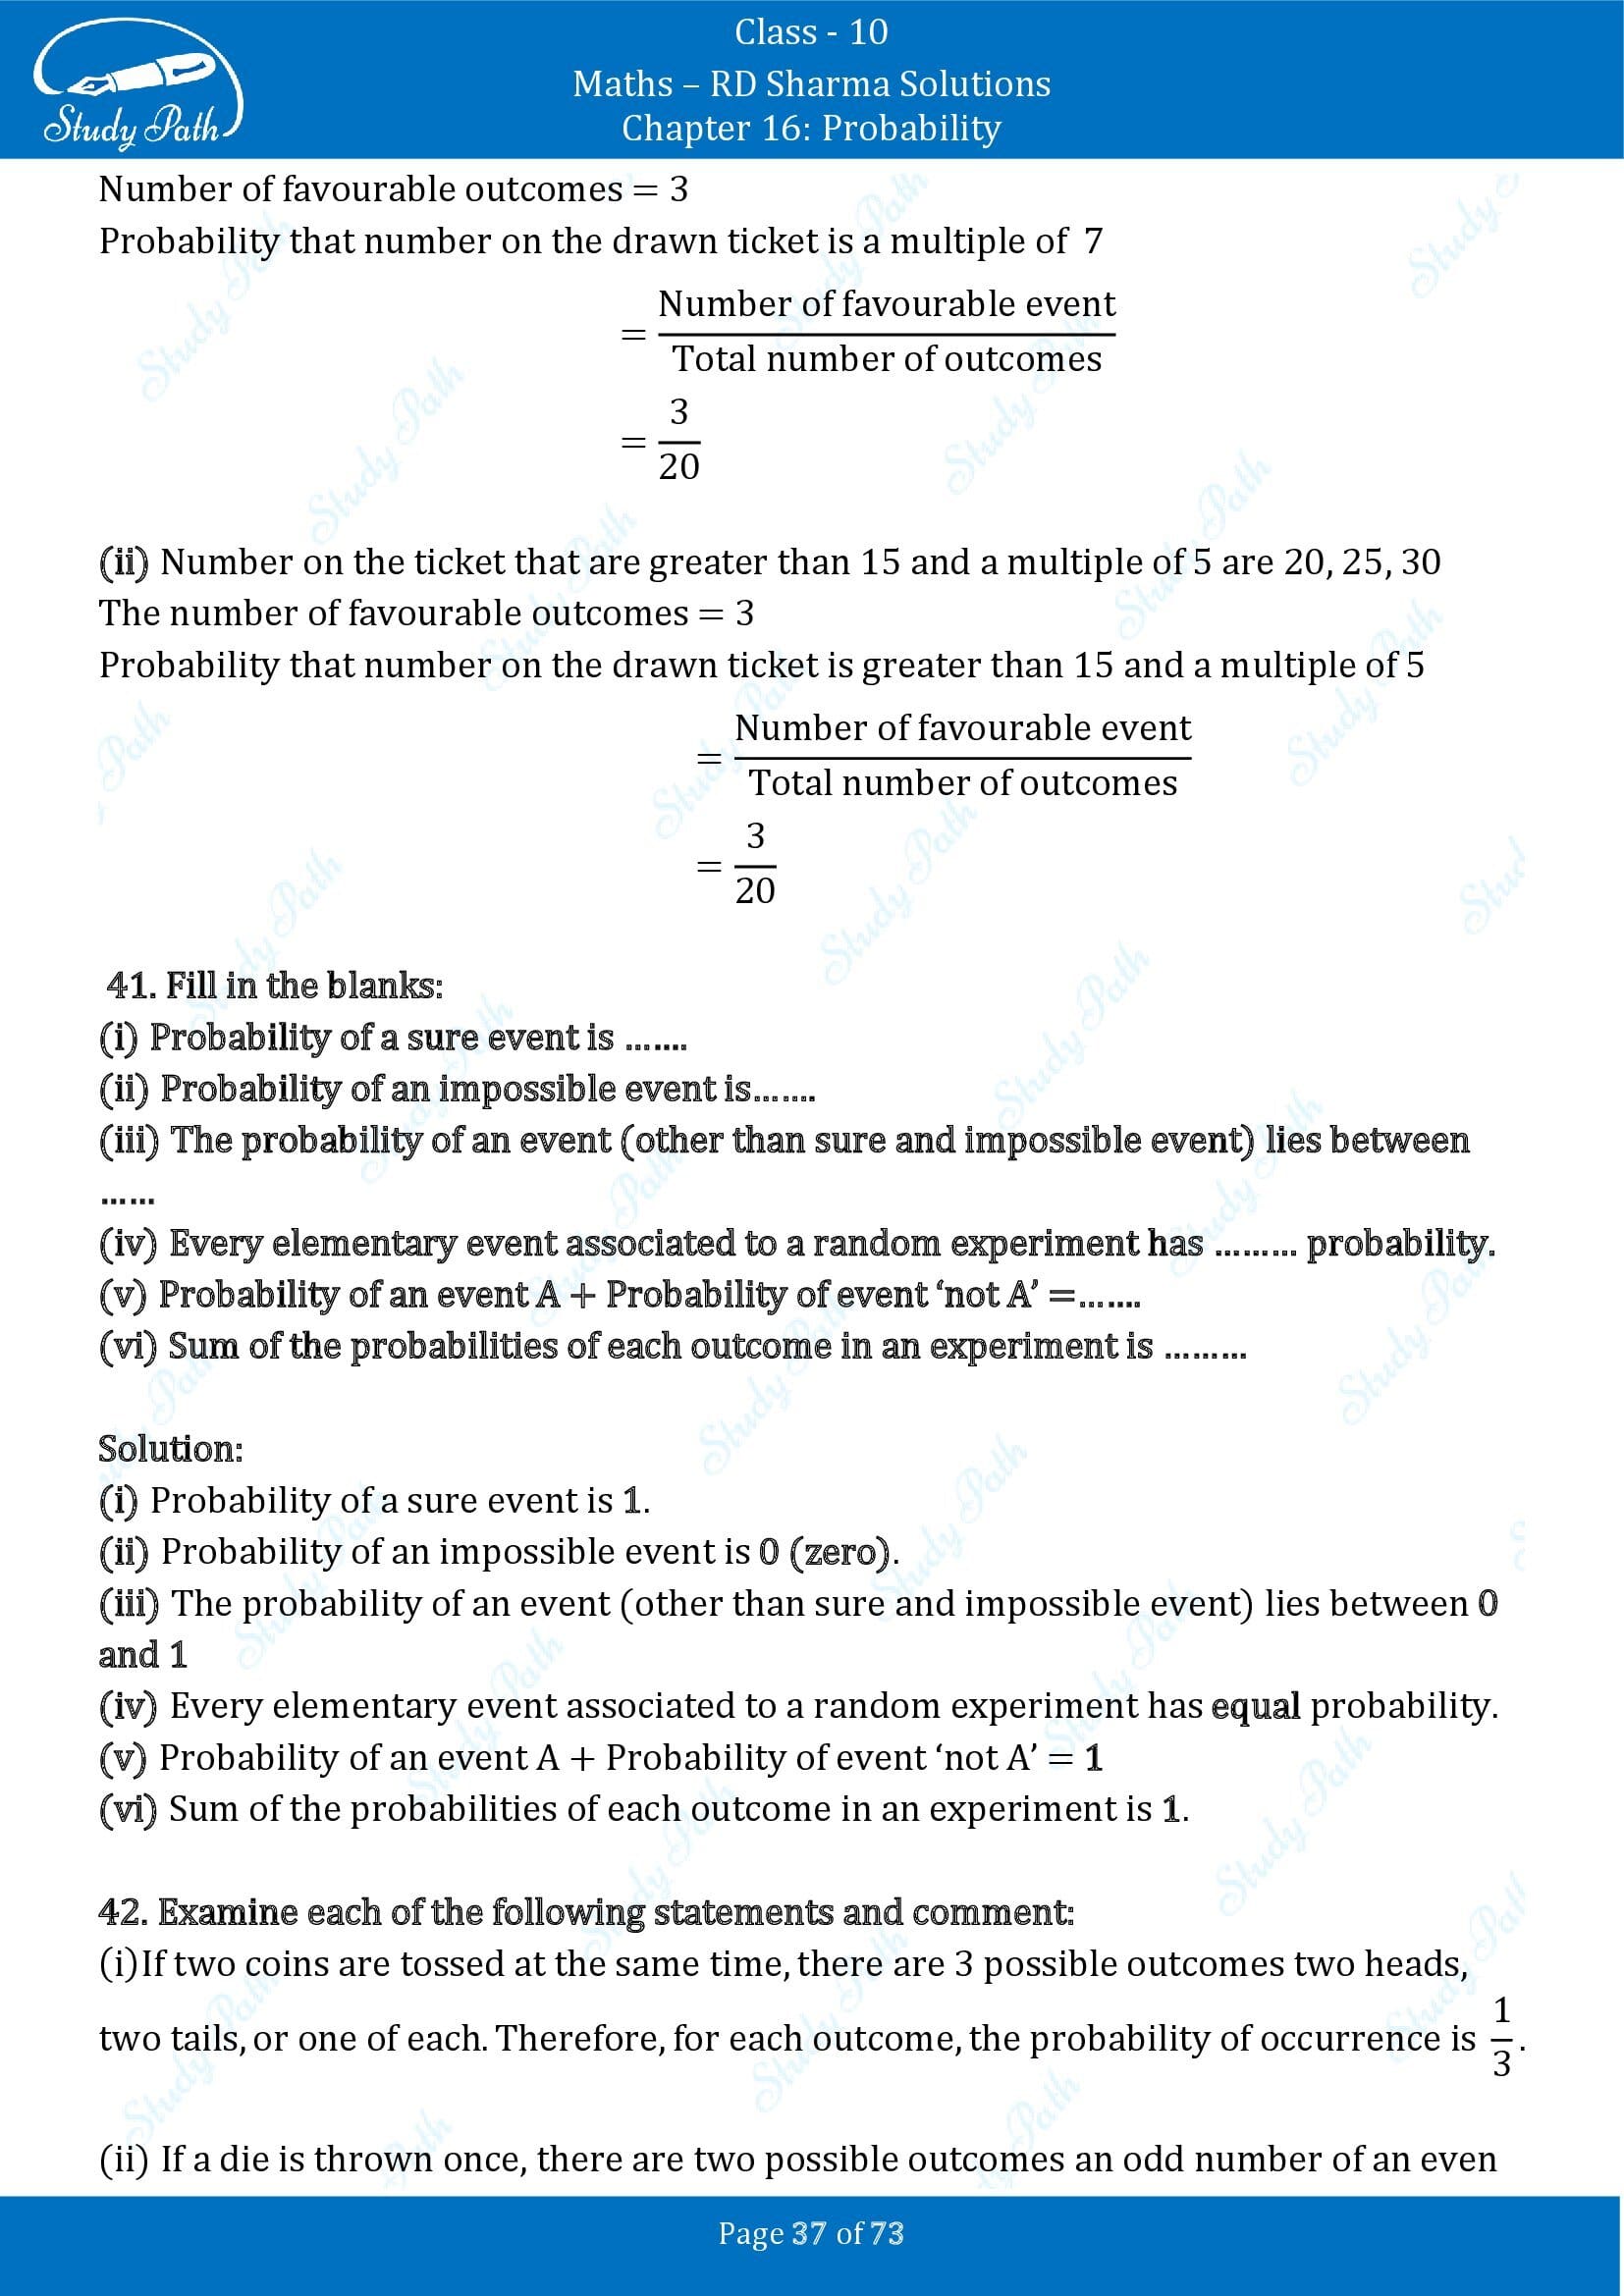 RD Sharma Solutions Class 10 Chapter 16 Probability Exercise 16.1 00037